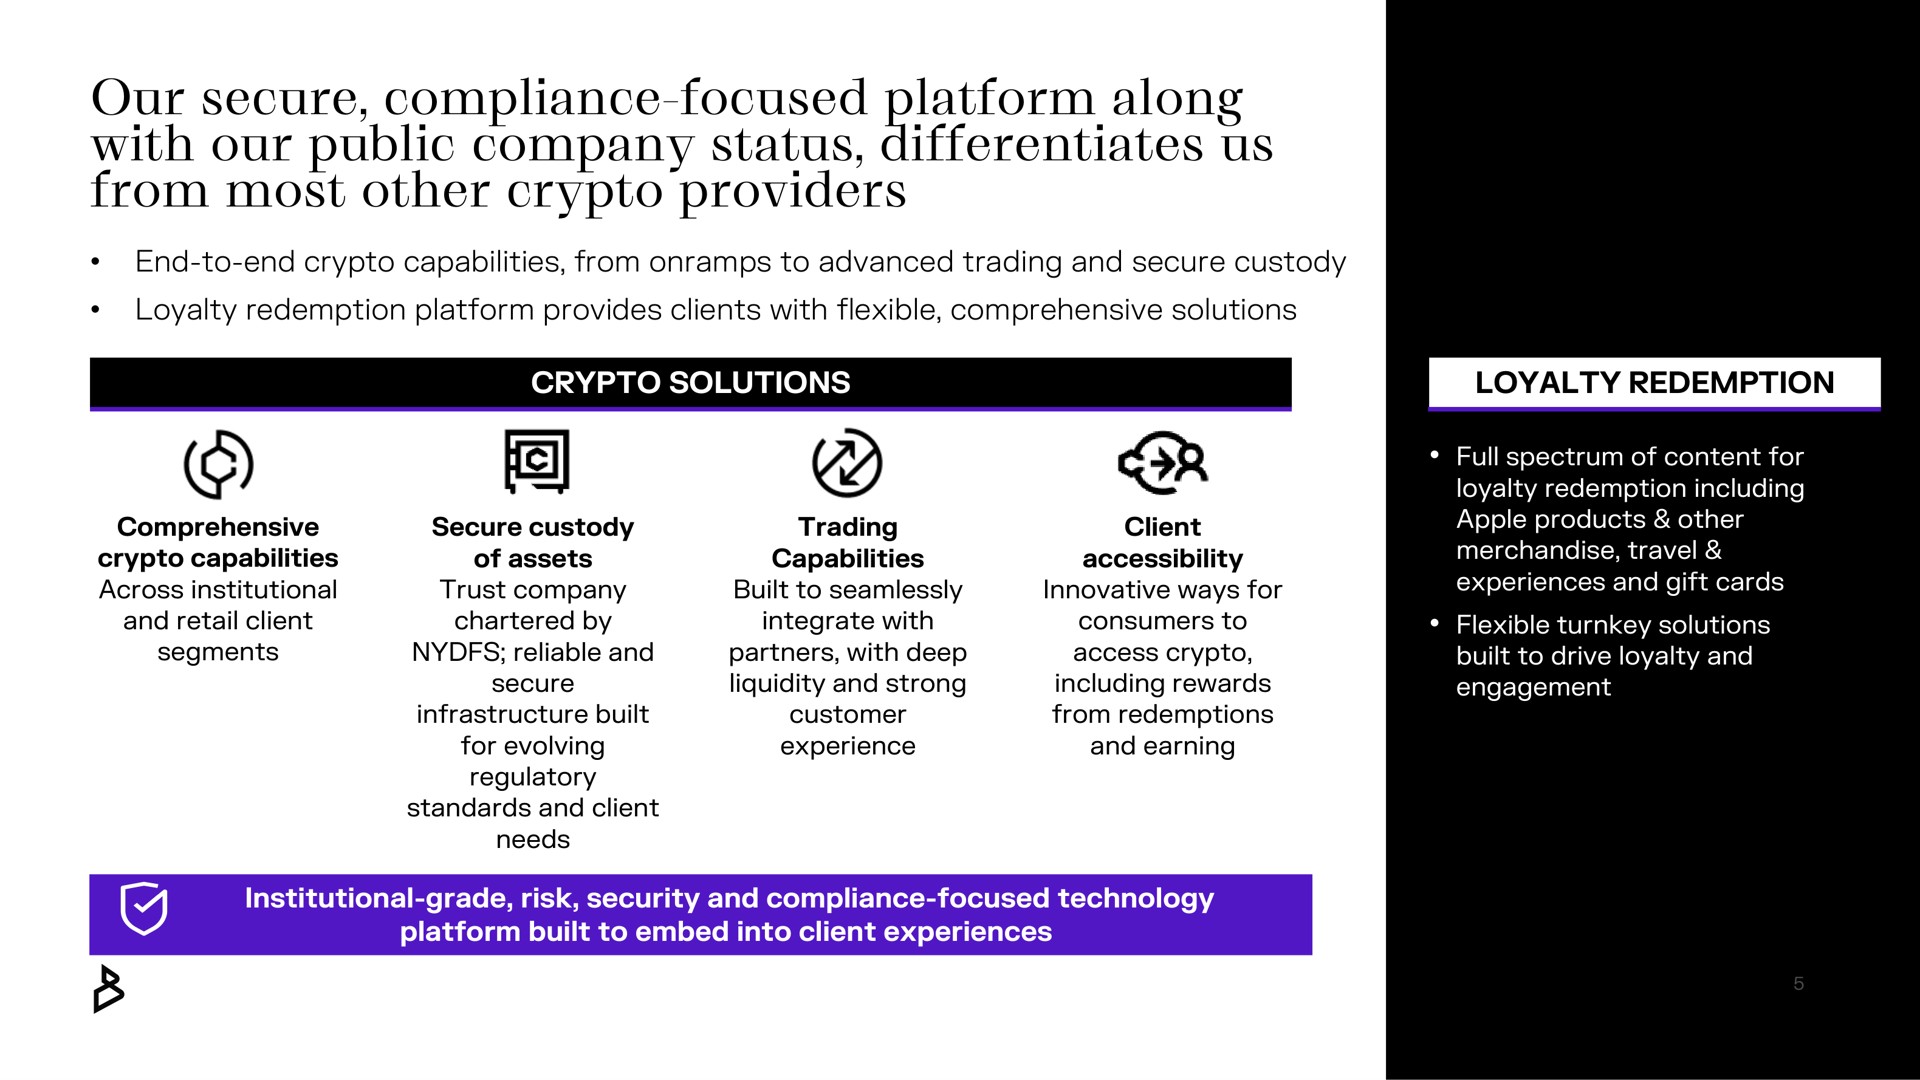 our secure compliance focused platform along with our public company status differentiates us from most other providers | Bakkt